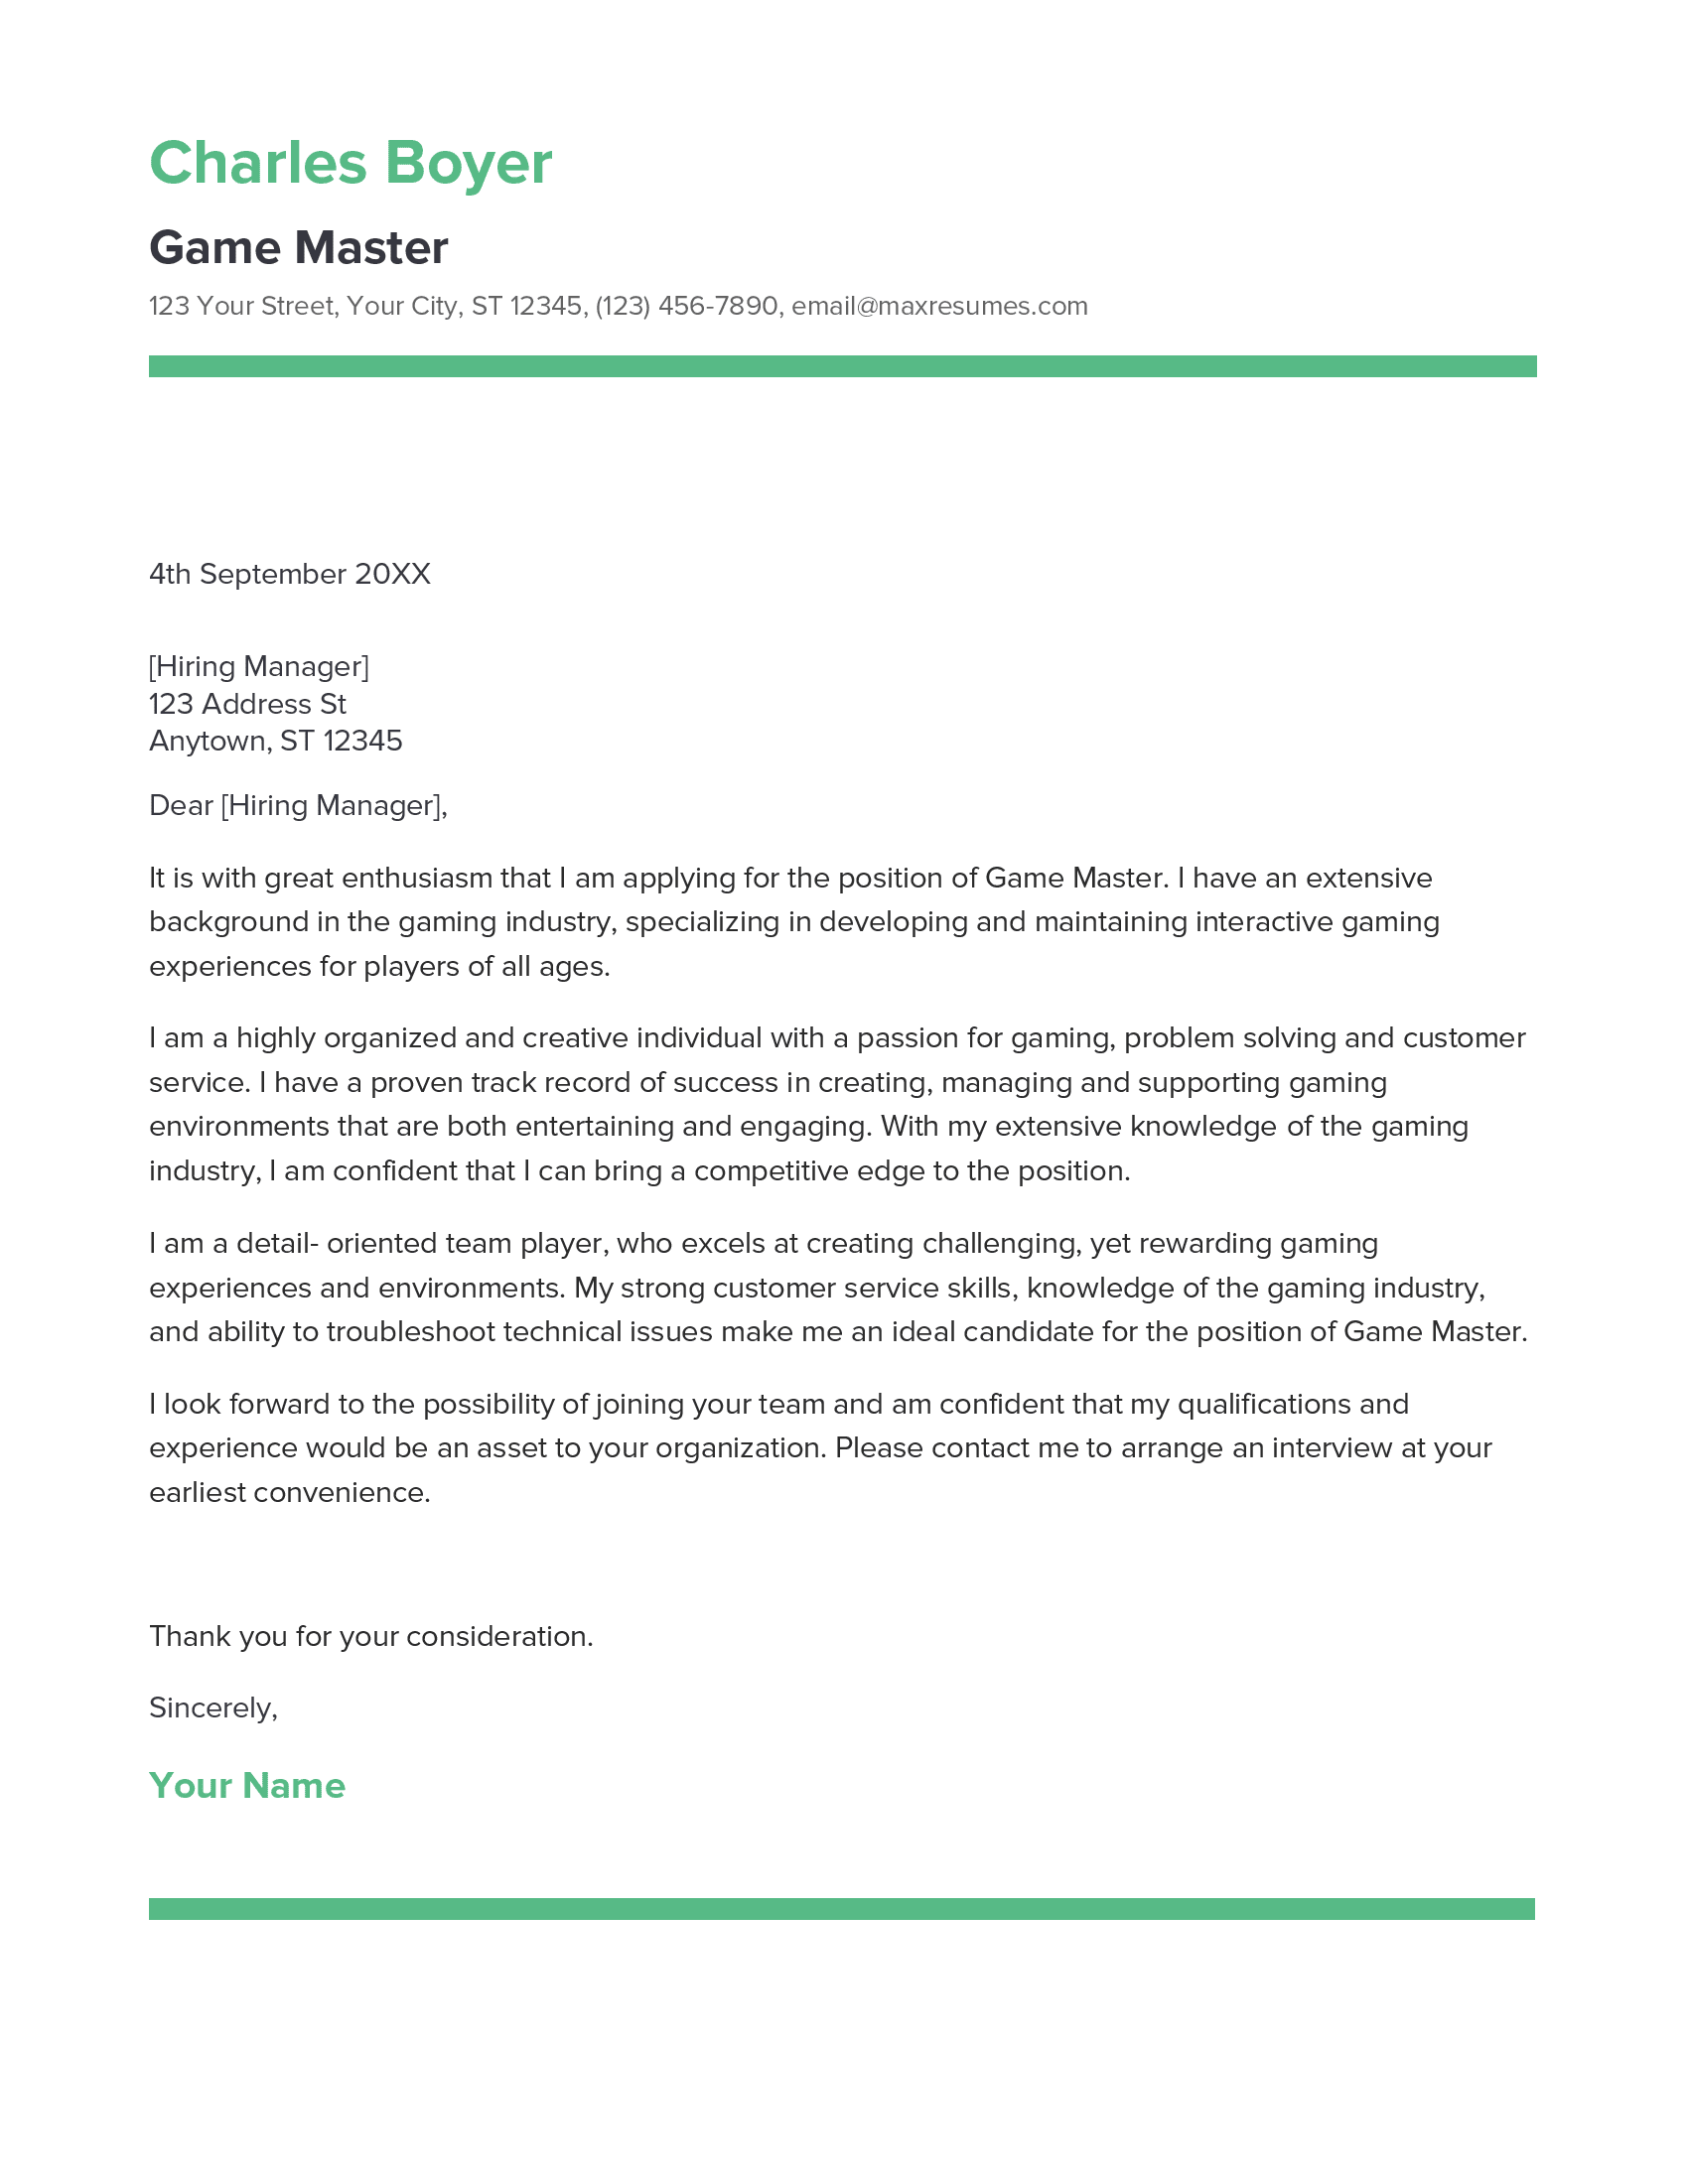 Game Master Cover Letter Example